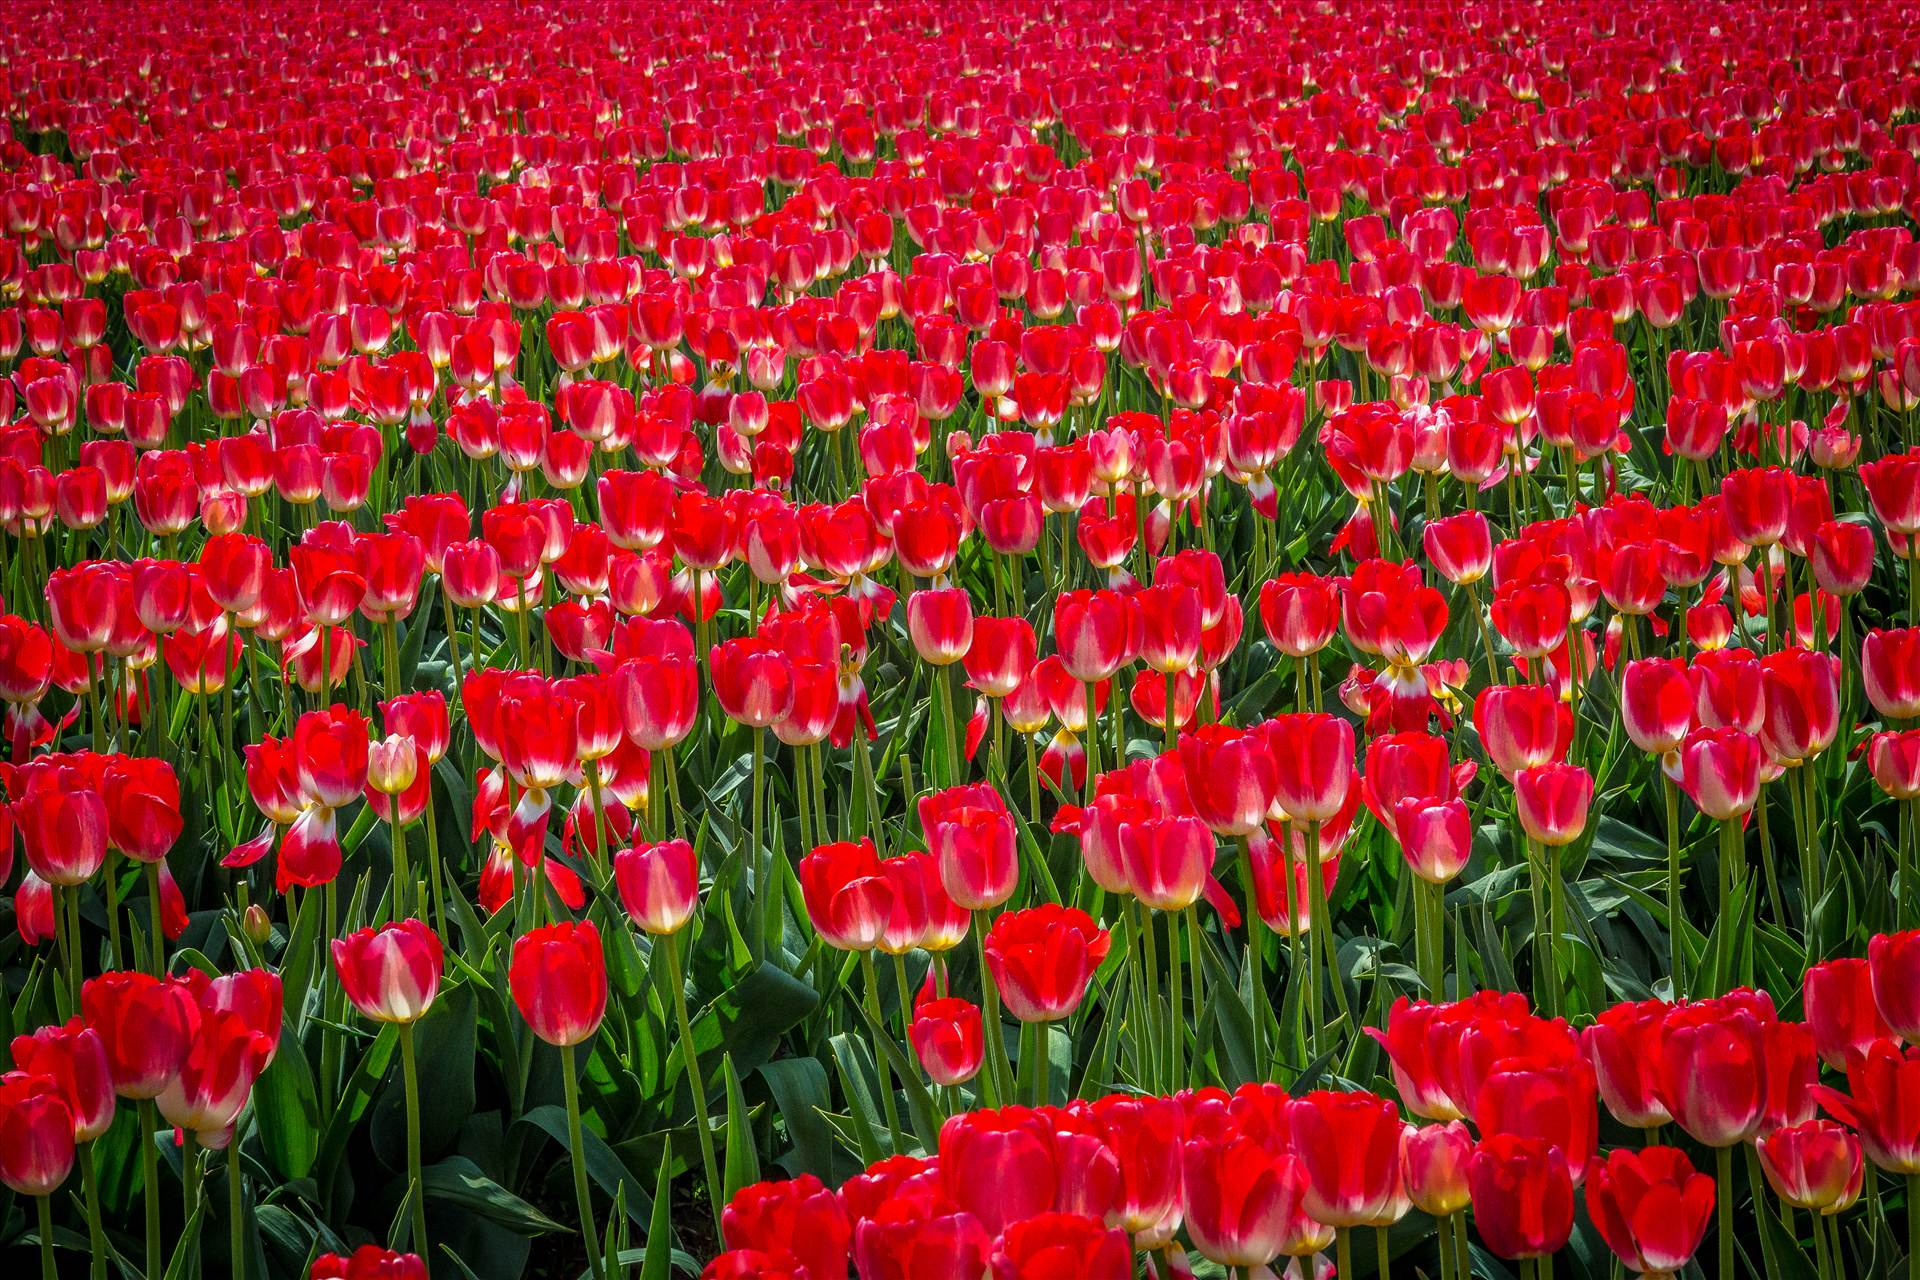 Sea of Red Tulips - From the Skagit County Tulip Festival in Washington state. by Scott Smith Photos